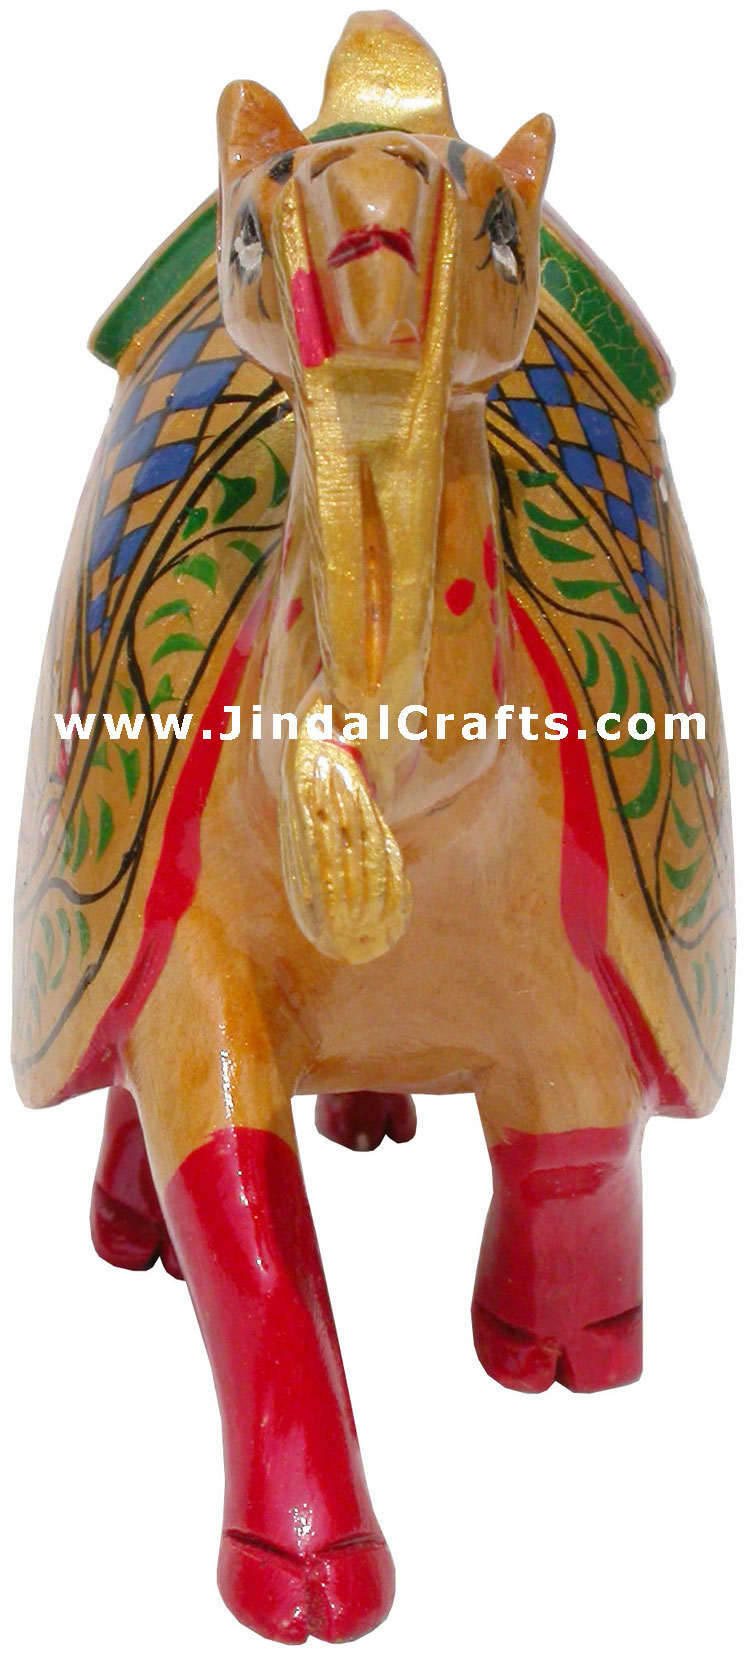 Royal Wooden Camel - Hand Painted, Hand Carved Animal